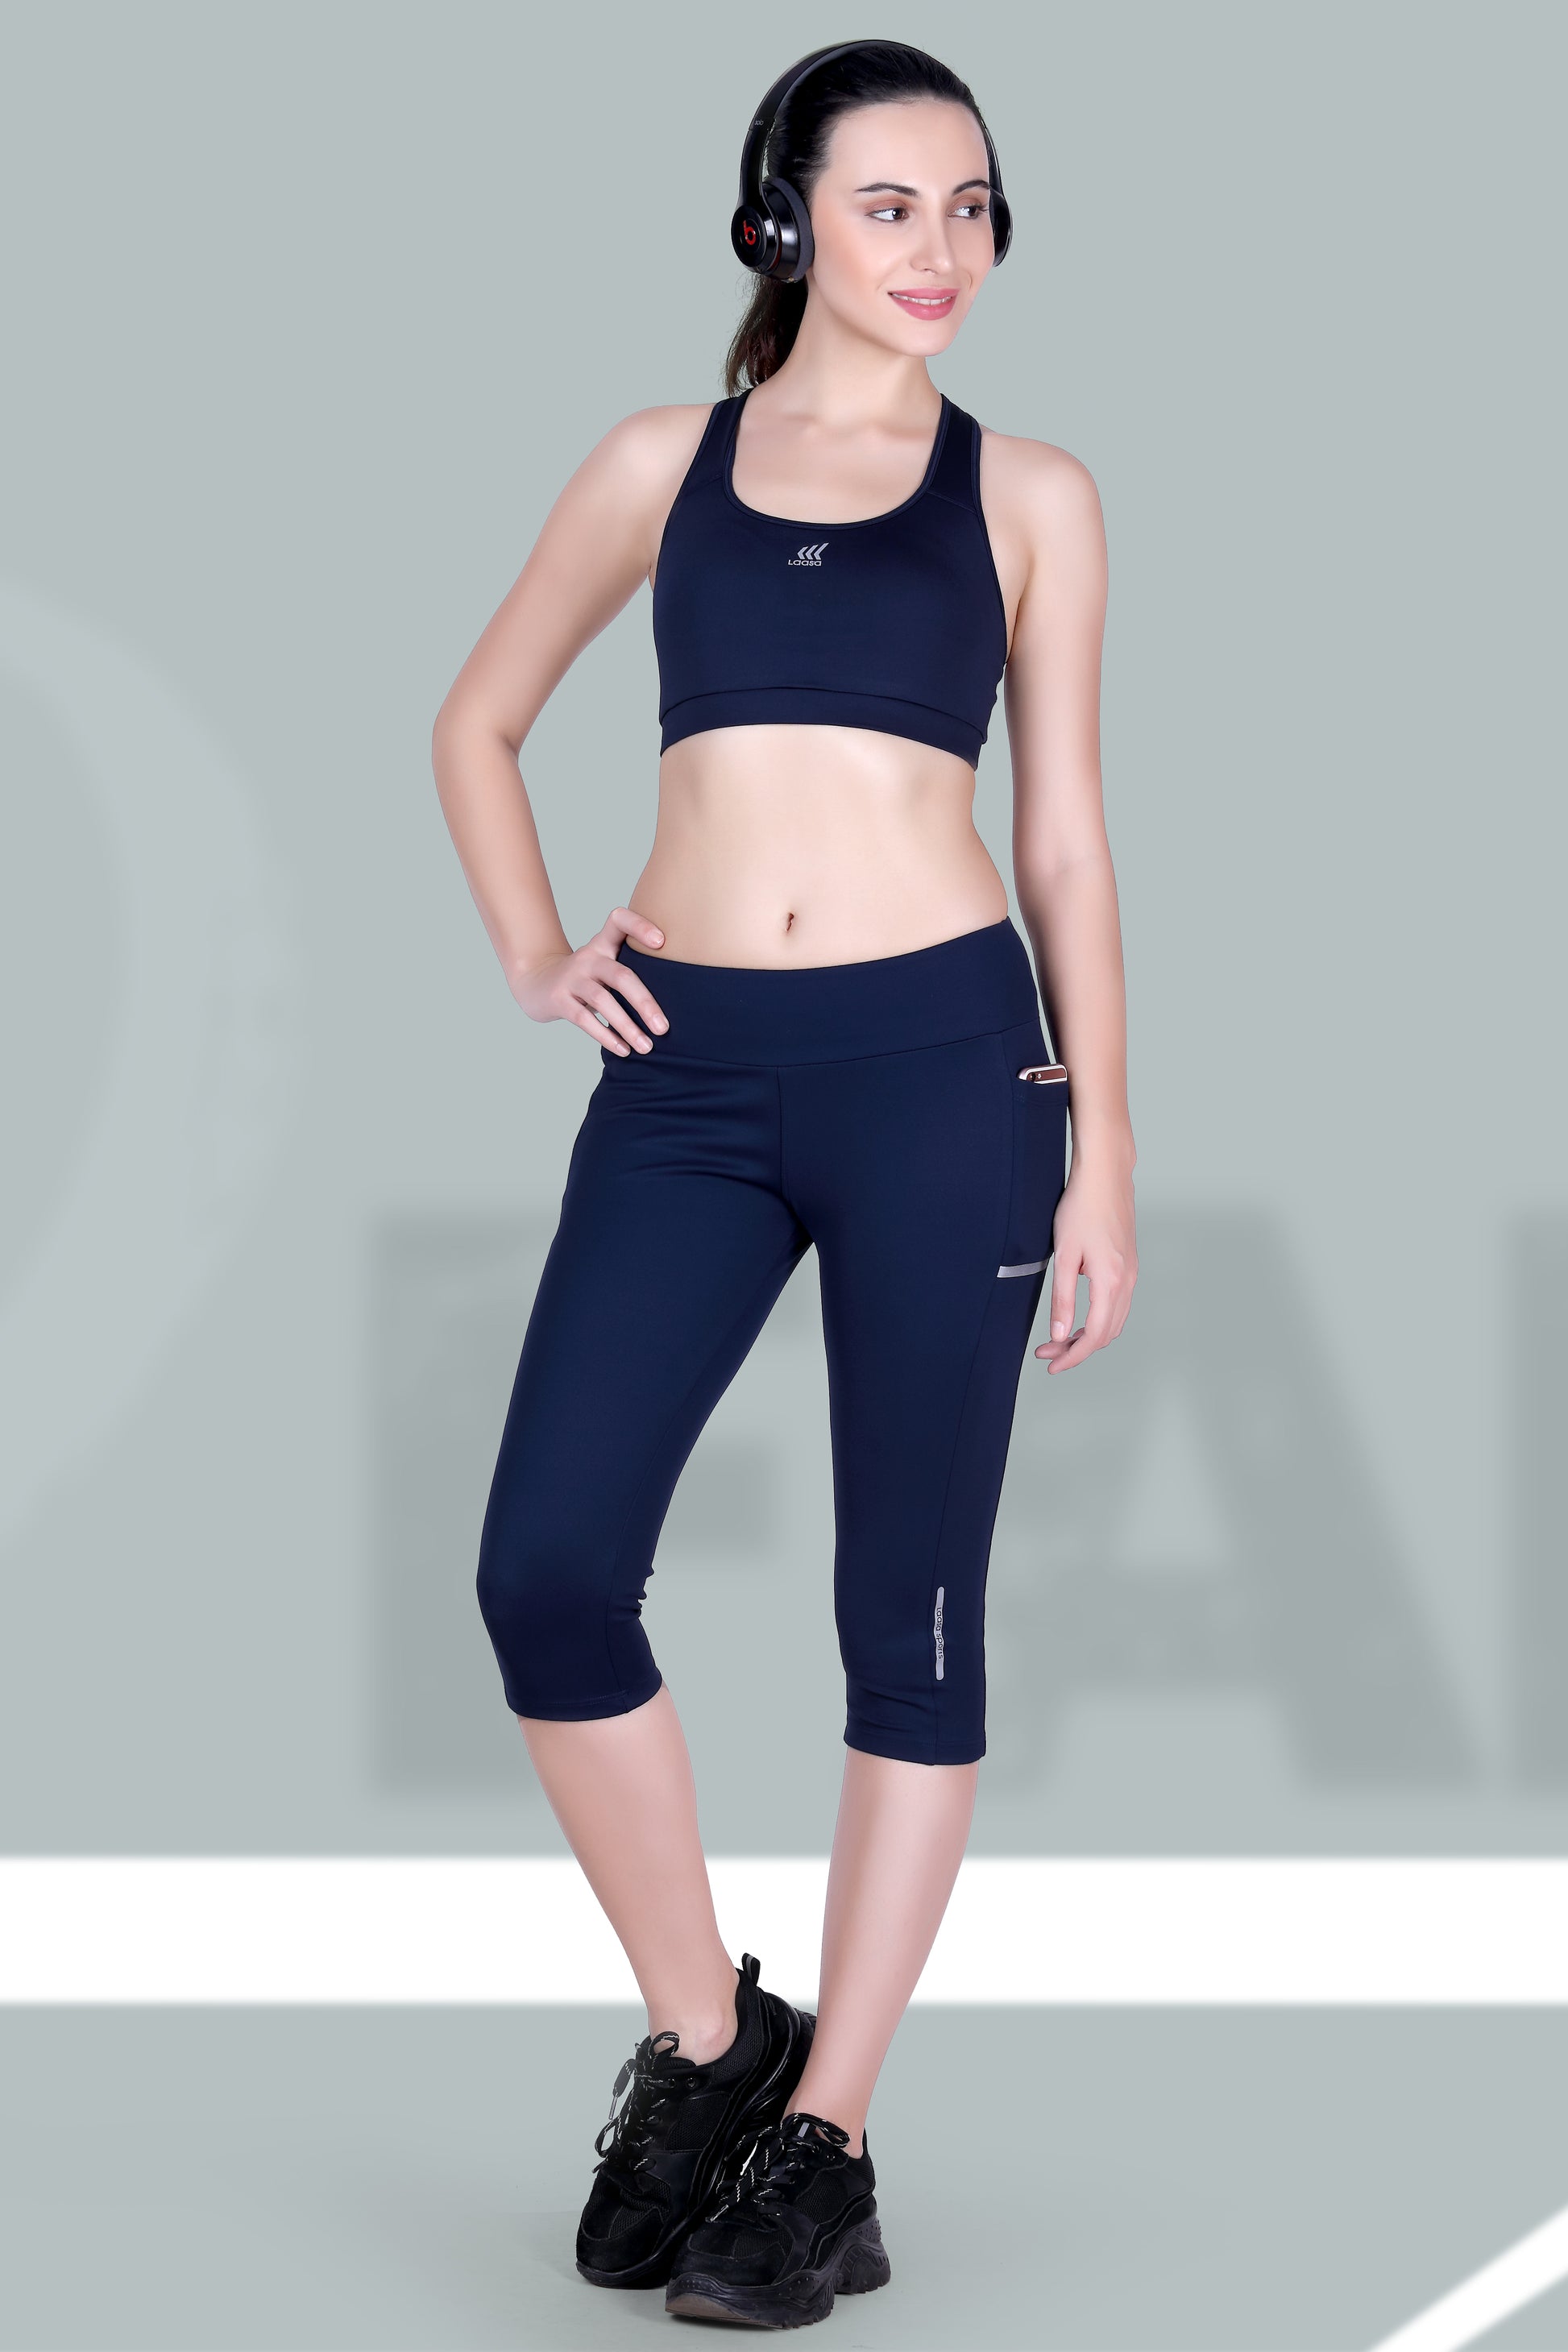 WOMEN'S JUST-DRY GYM WORKOUT FITNESS CAPRI